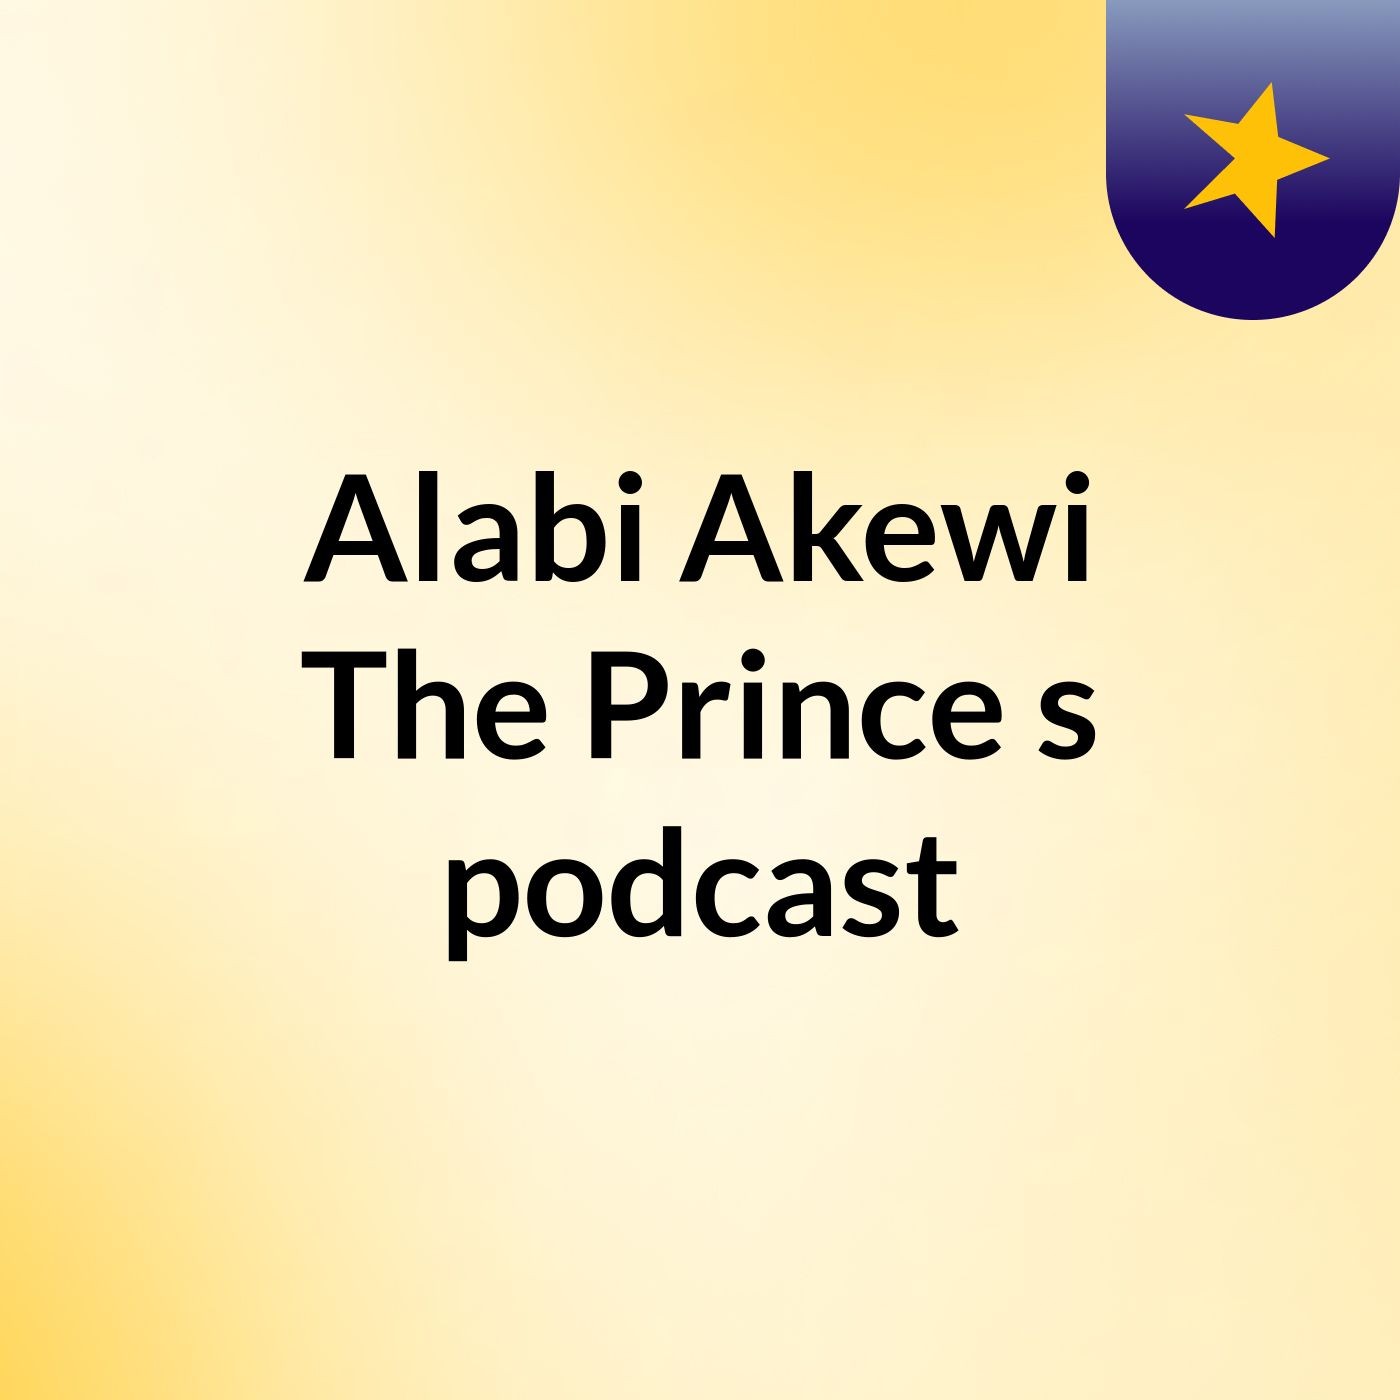 New Month Message By Alabi Akewi